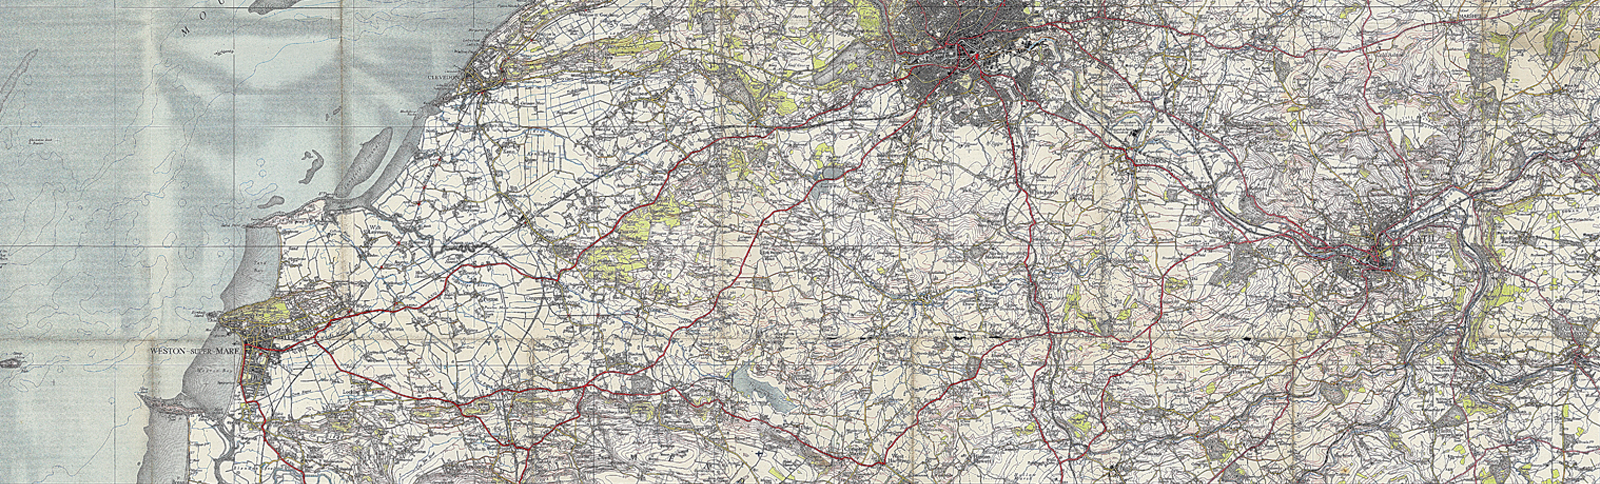 Rare Map Scanning for in Oxfordshire UK